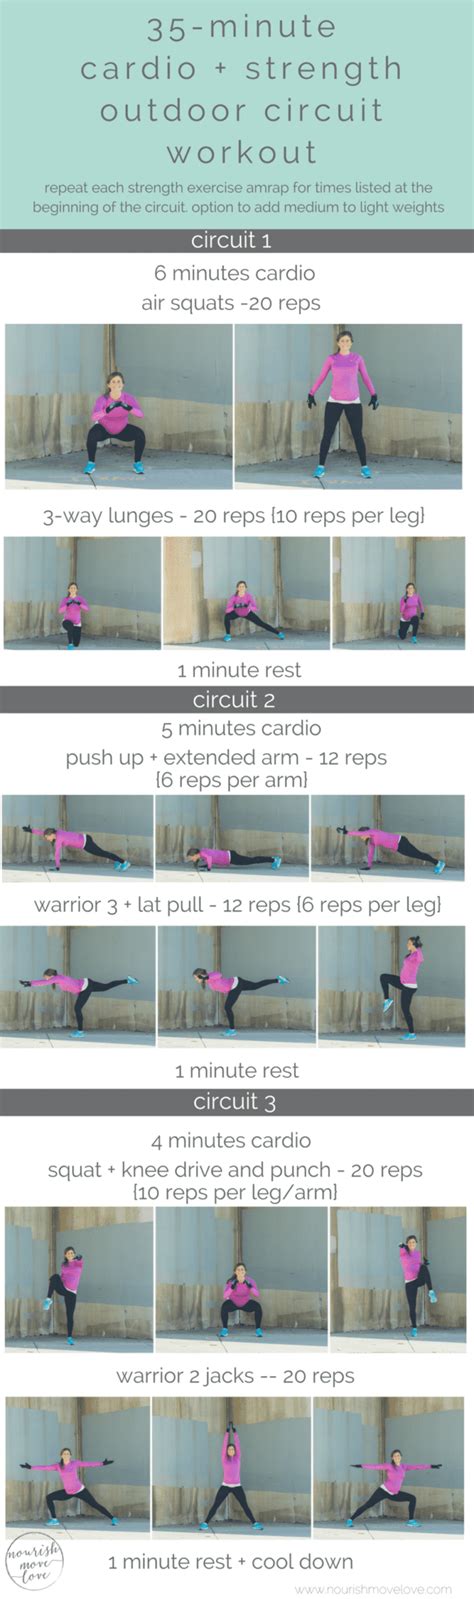 Outdoor Minute Cardio Strength Circuit Workout Nourish Move Love